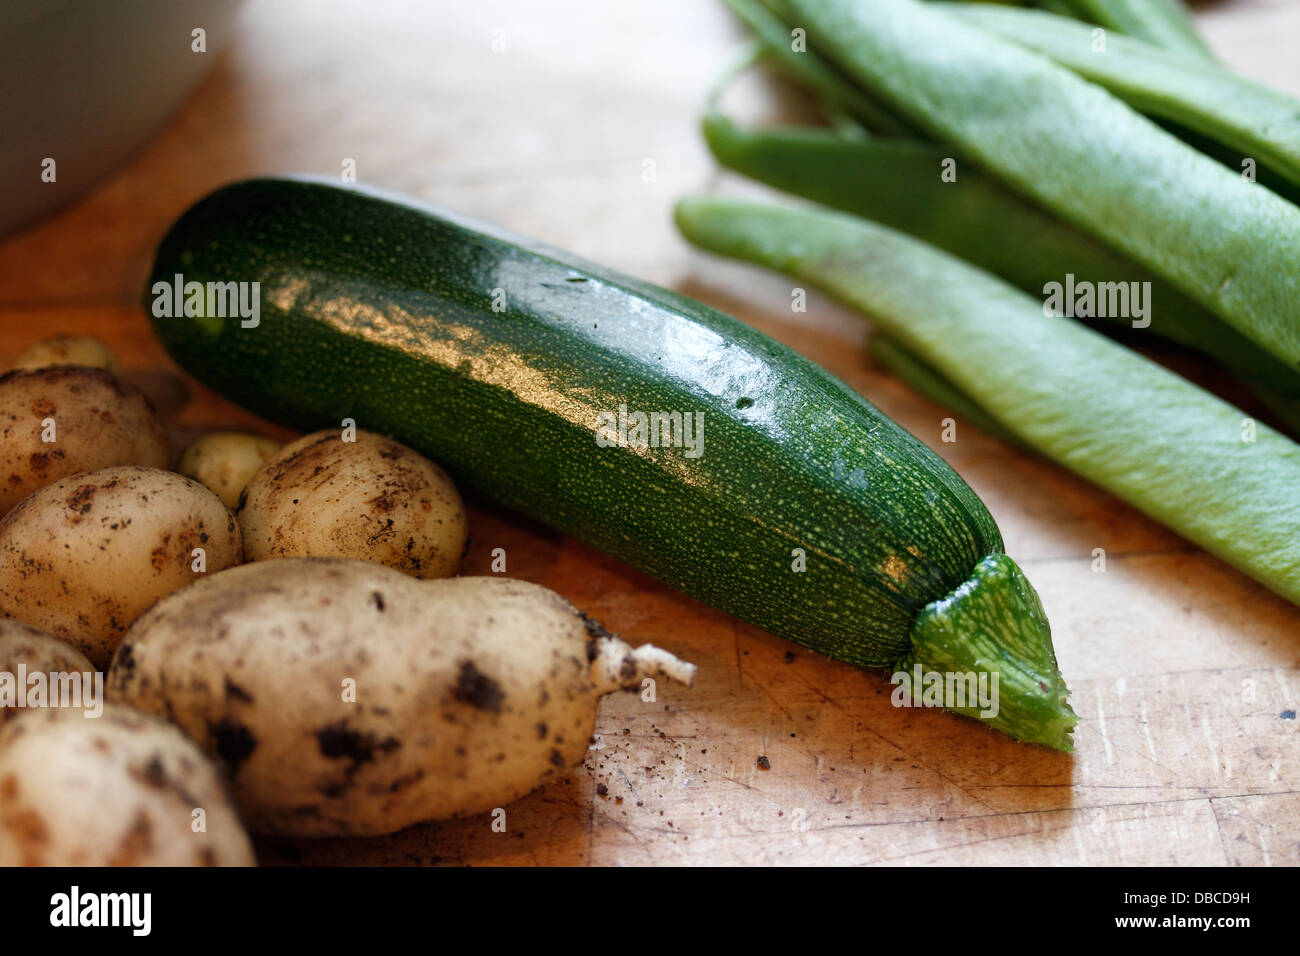 Picked and grown in the garden. l-r new potatoes - Solanum tuberosum, courgette or zucchini - Cucurbita pepo, runner beans - Phaseolus coccineus on a wooden (birch) kitchen worktop Stock Photo